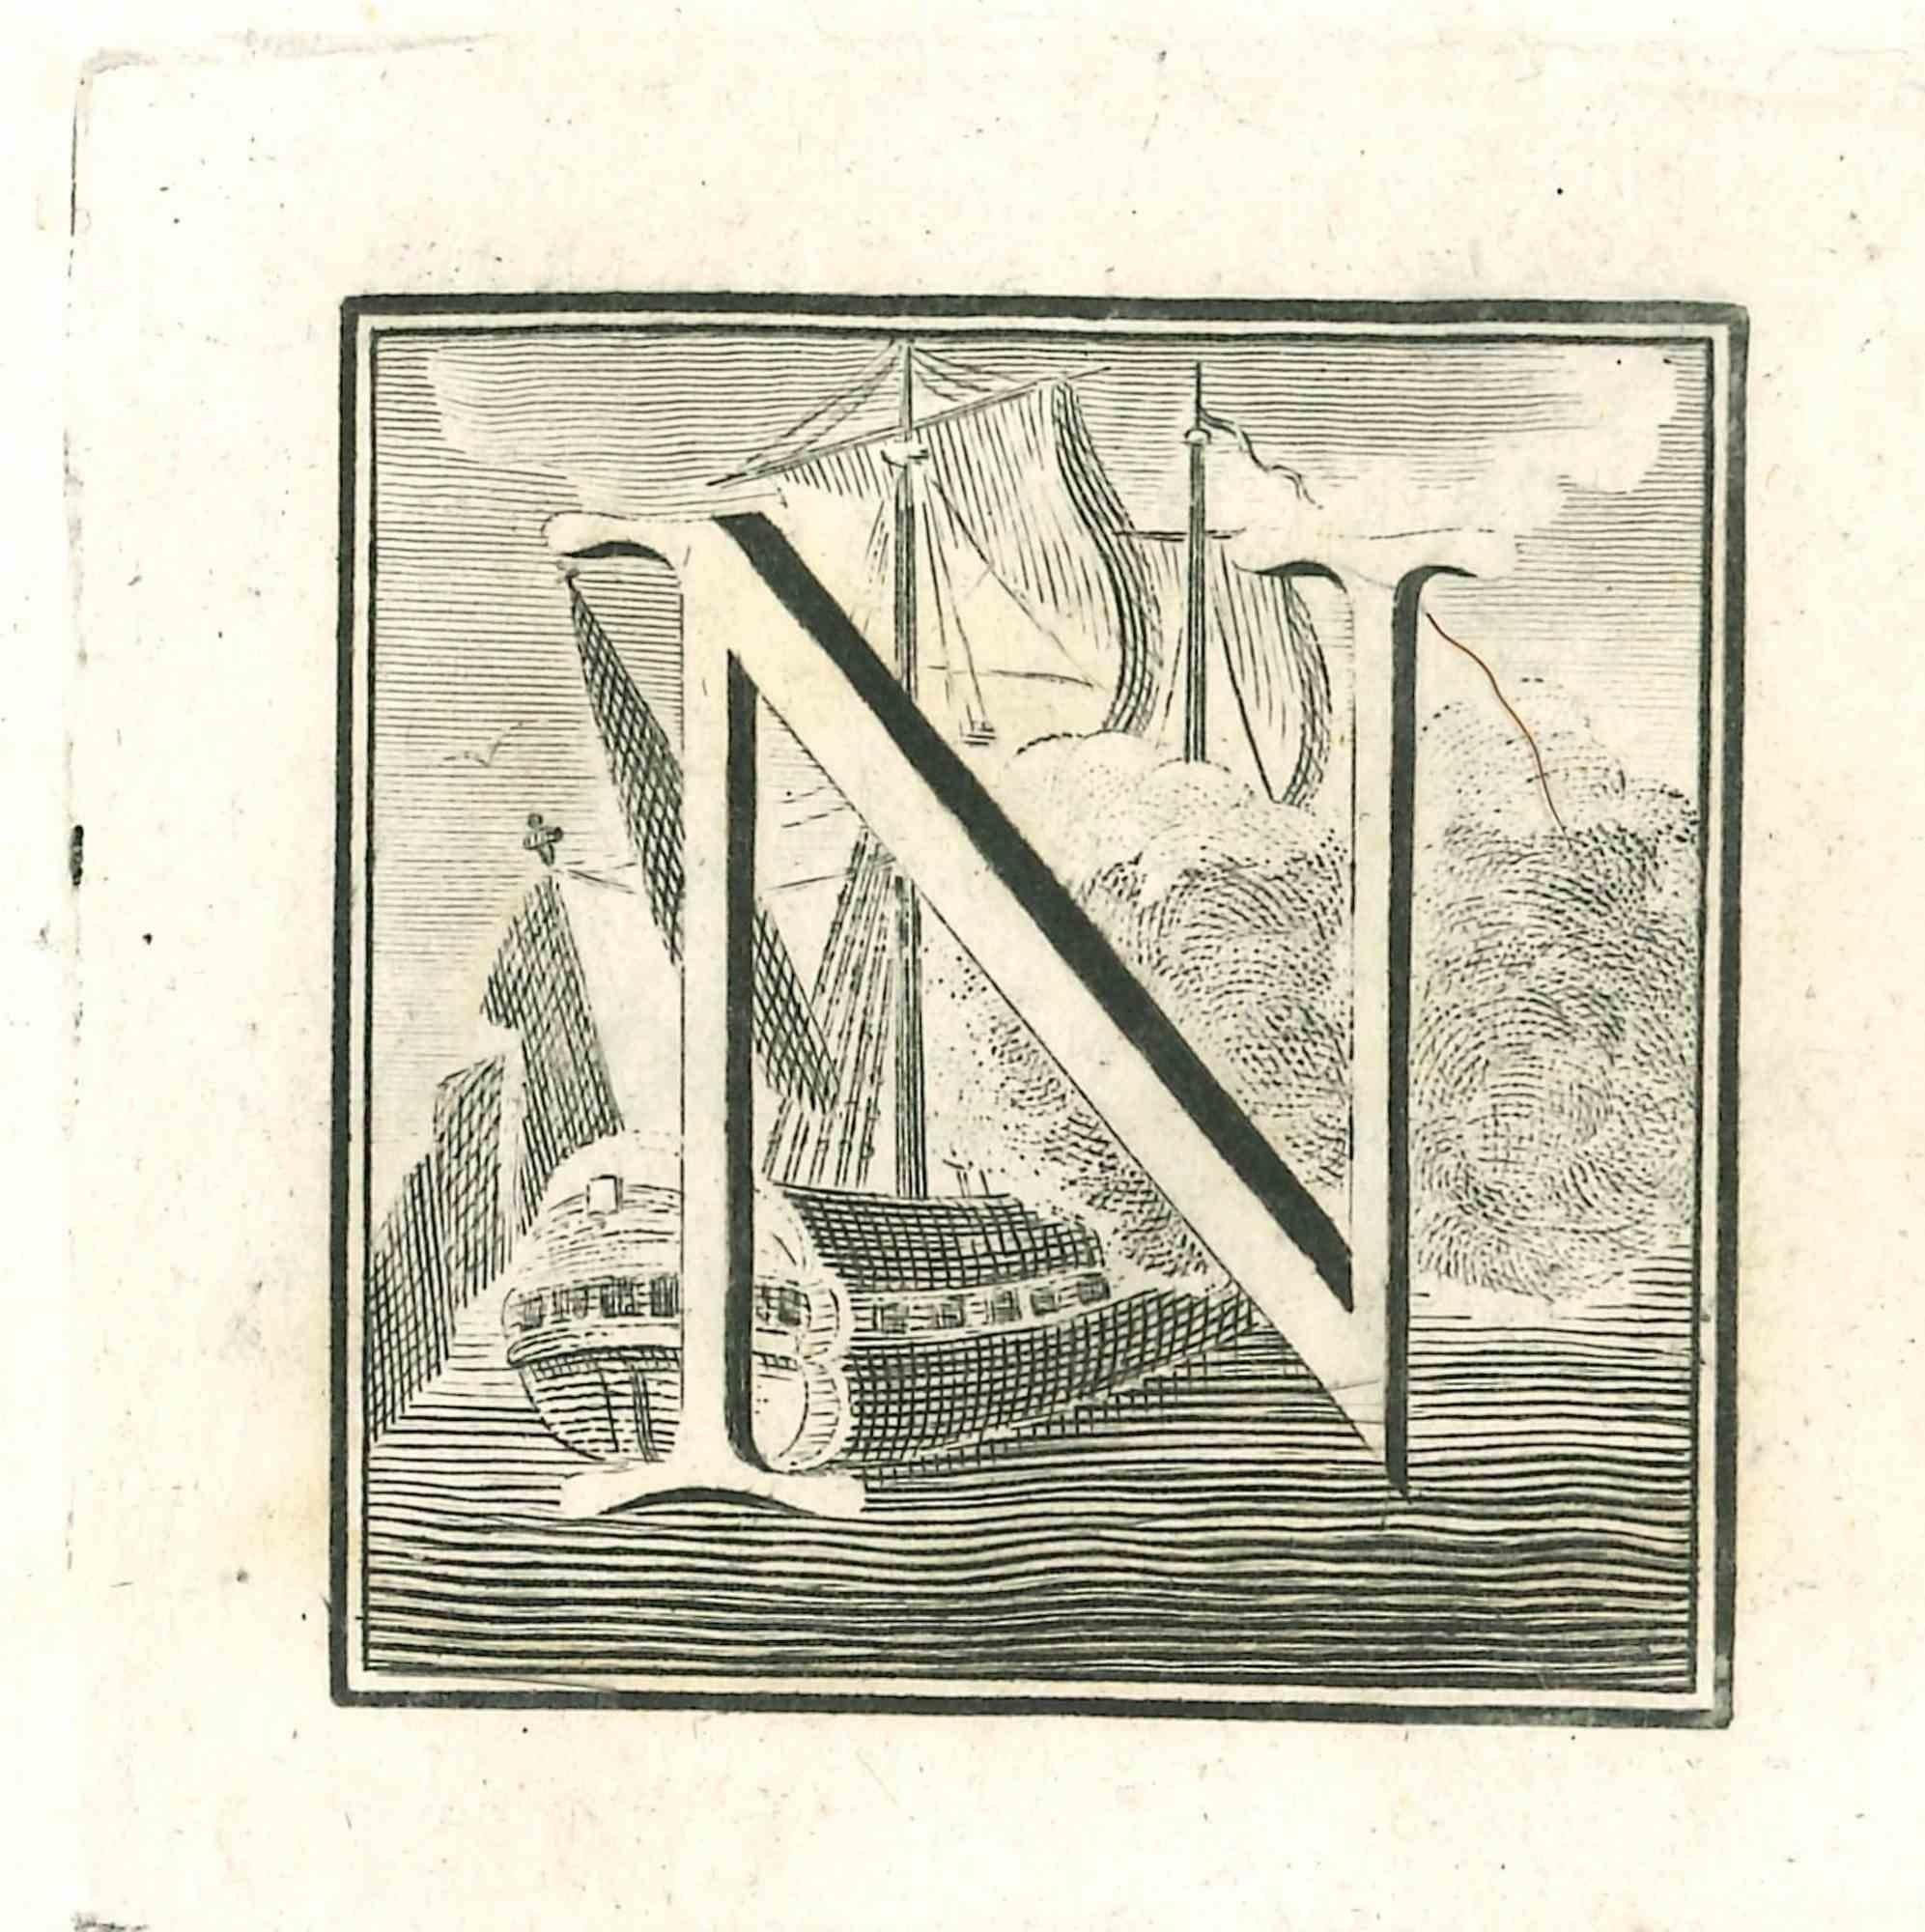 Unknown Figurative Print - Capital Letter N from the Antiquities of Herculaneum - Etching - 18th Century